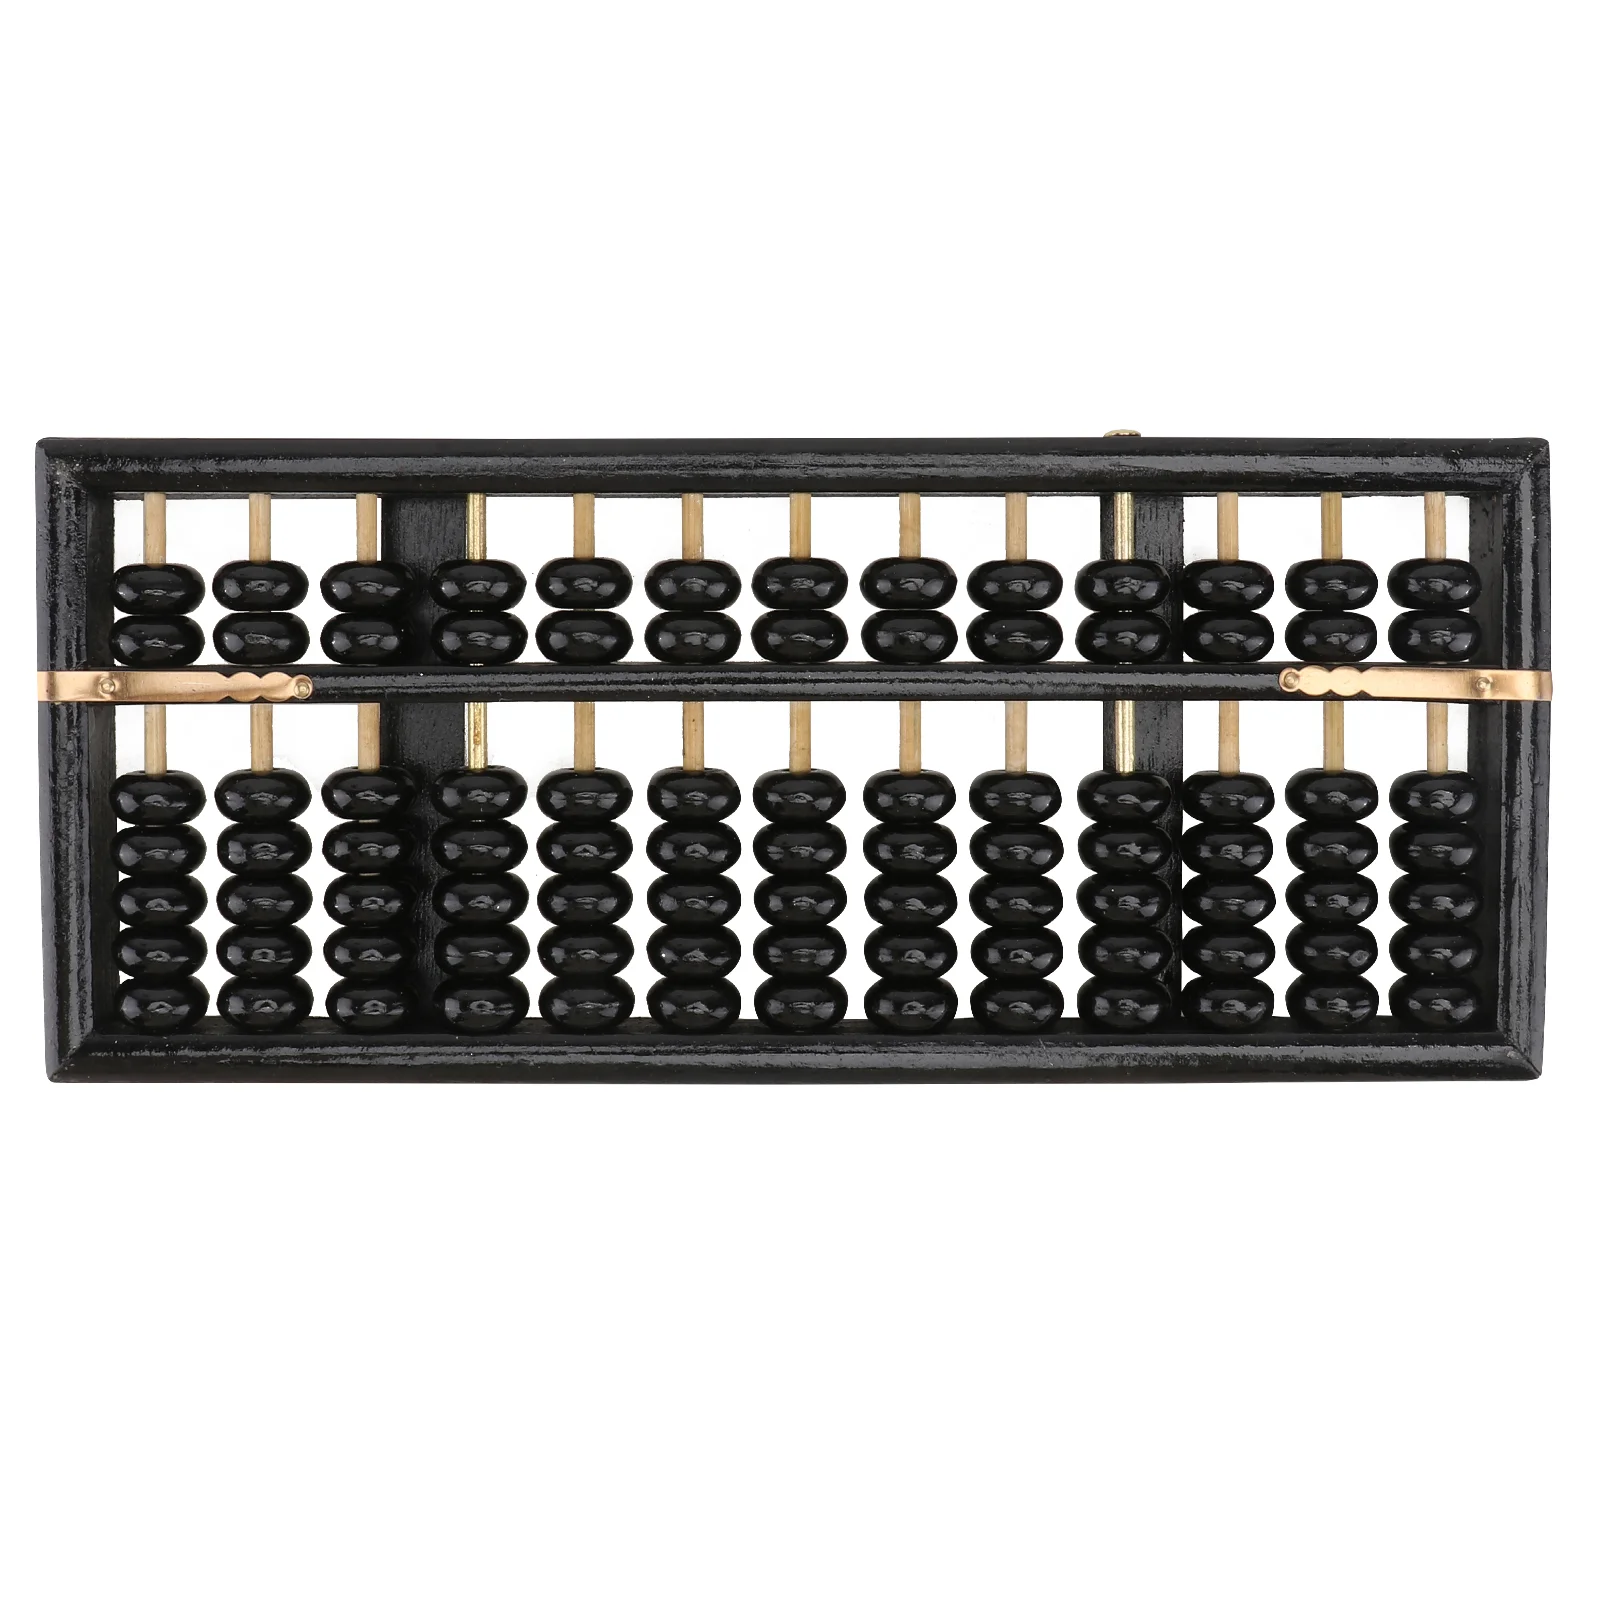 1pc Kids Learning Abacus Creative Kids Abacus Toy Educational Abacus 